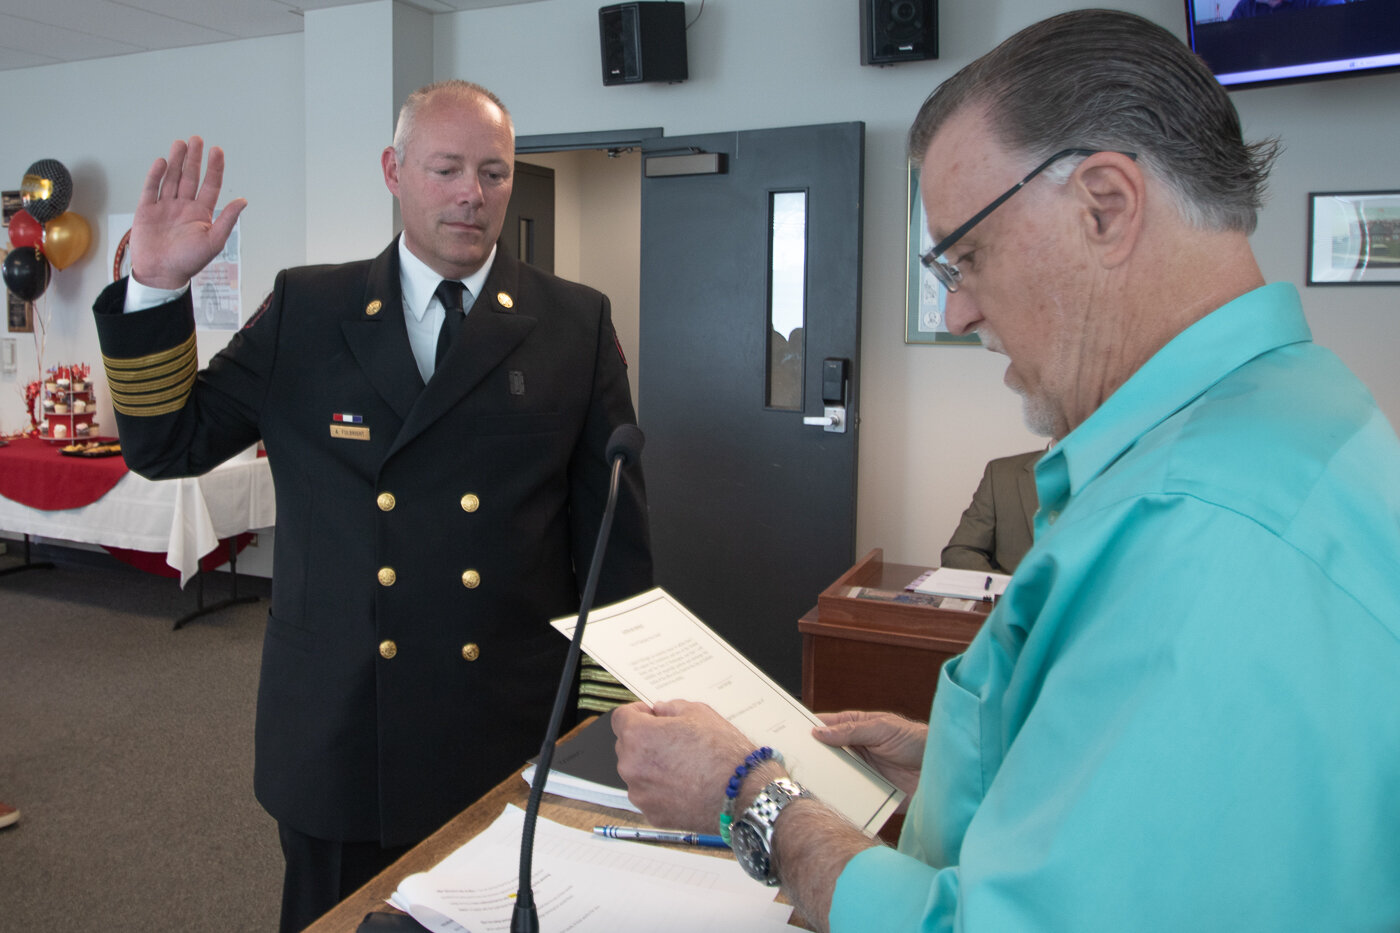 Chehalis Mayor Tony Ketchum swears in the city's new fire chief Adam Fulbright at the beginning of a city council meeting earlier this month.